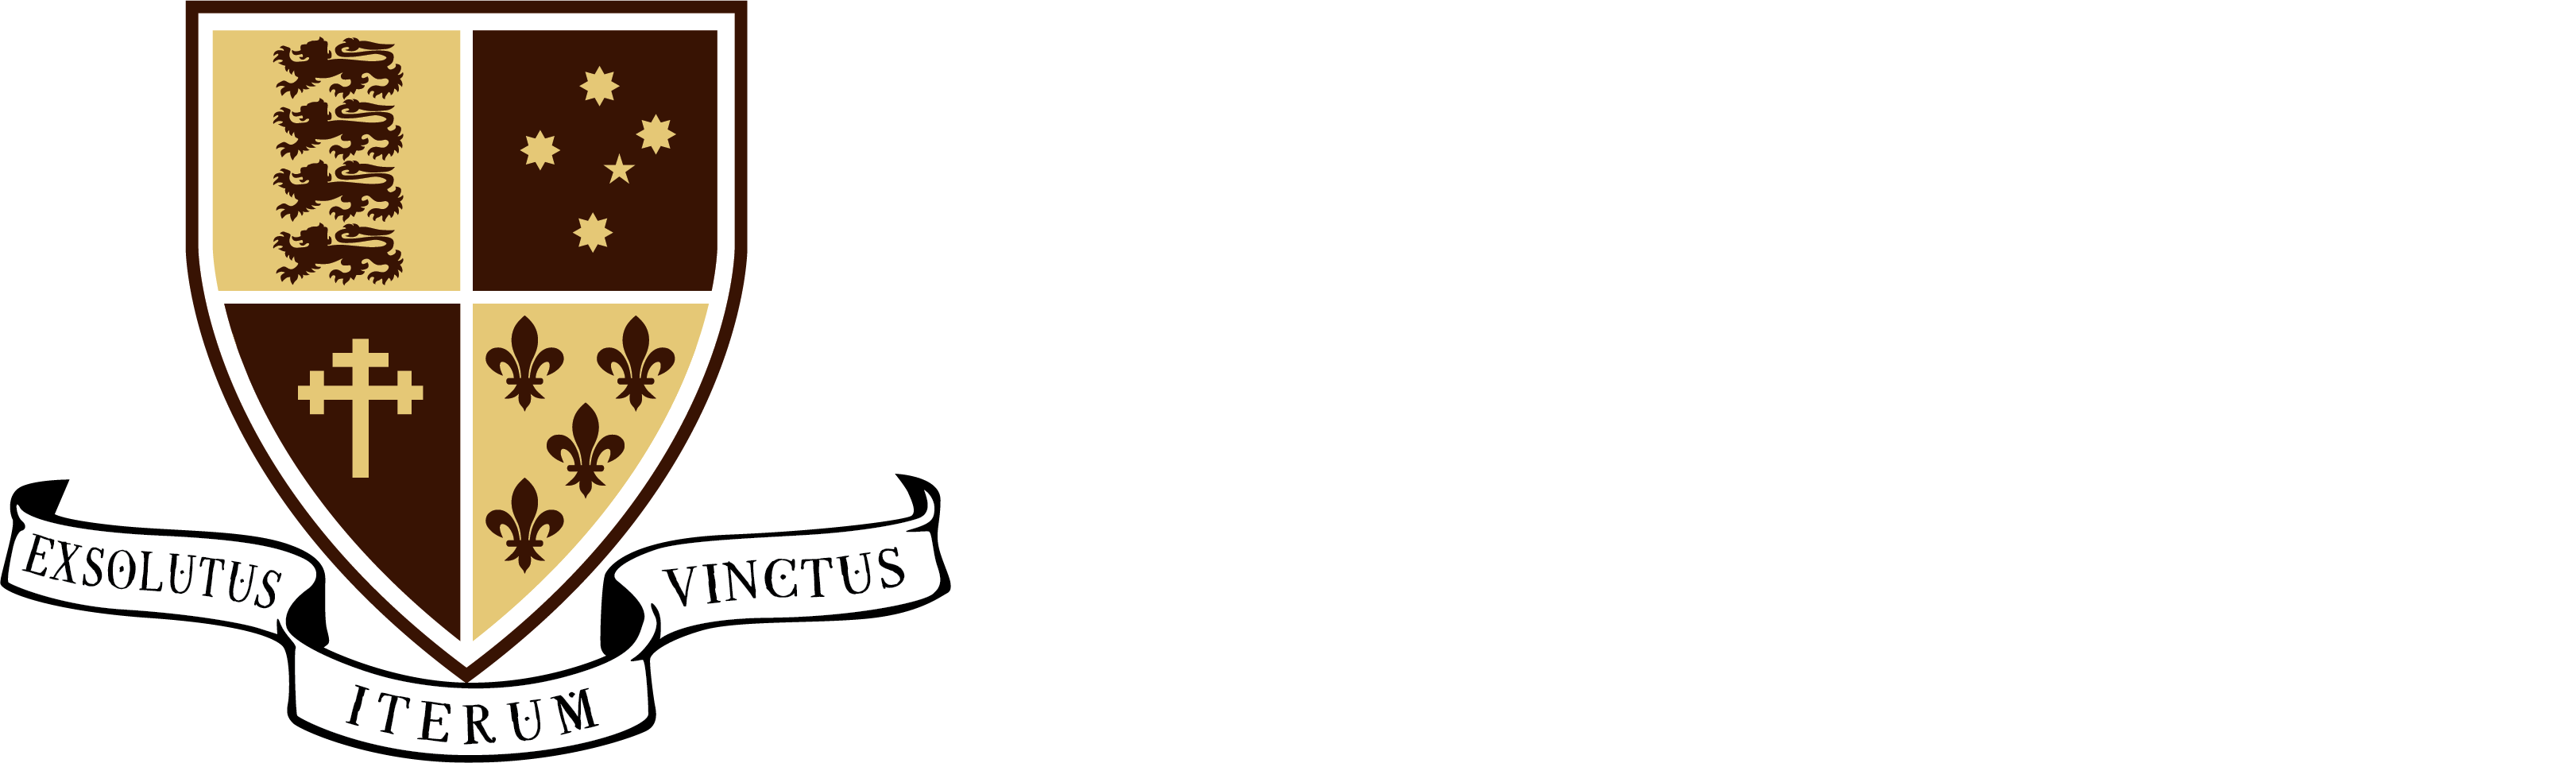 Logo of DDSN Client - St John's College, University of New South Wales (UNSW)